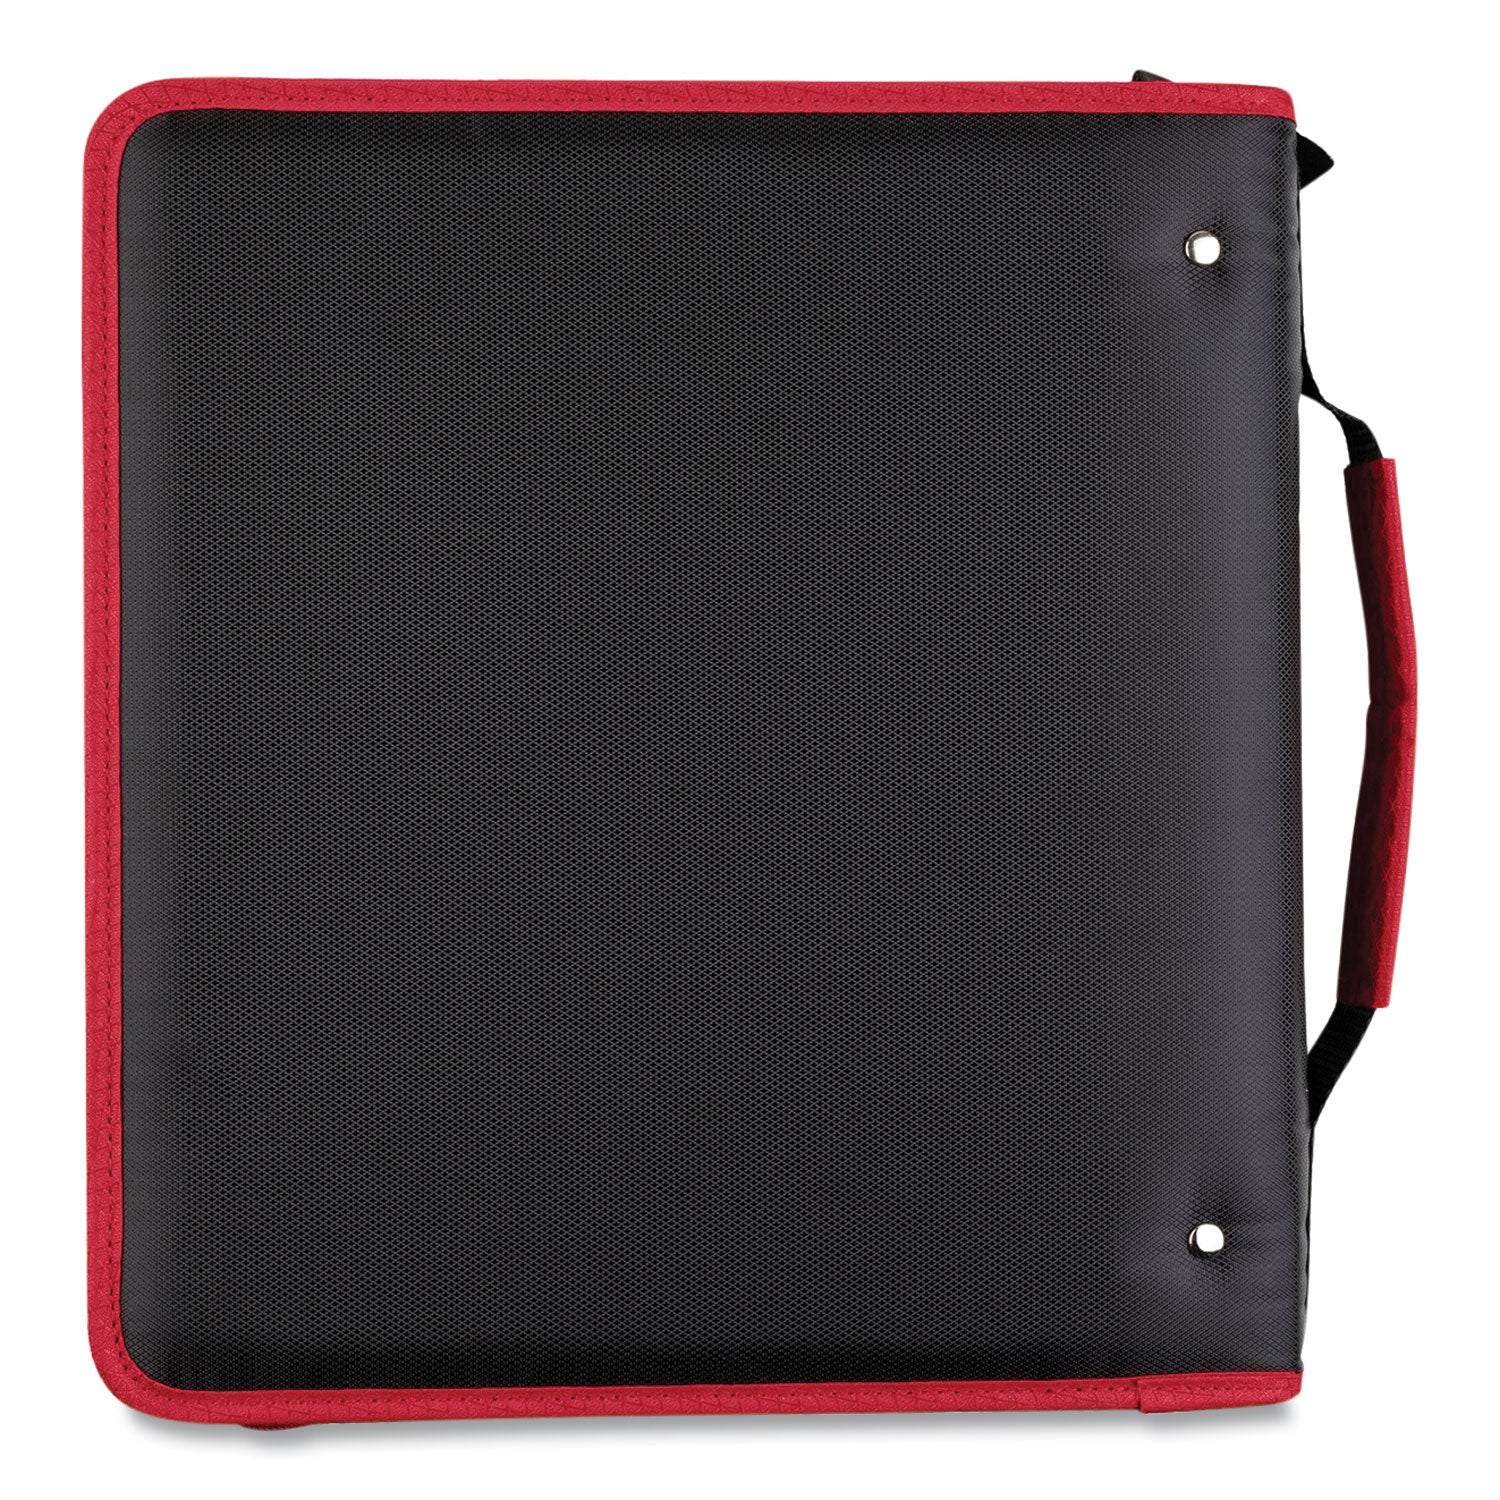 zipper-binder-3-rings-2-capacity-11-x-85-black-red-accents_mea29052ce8 - 2